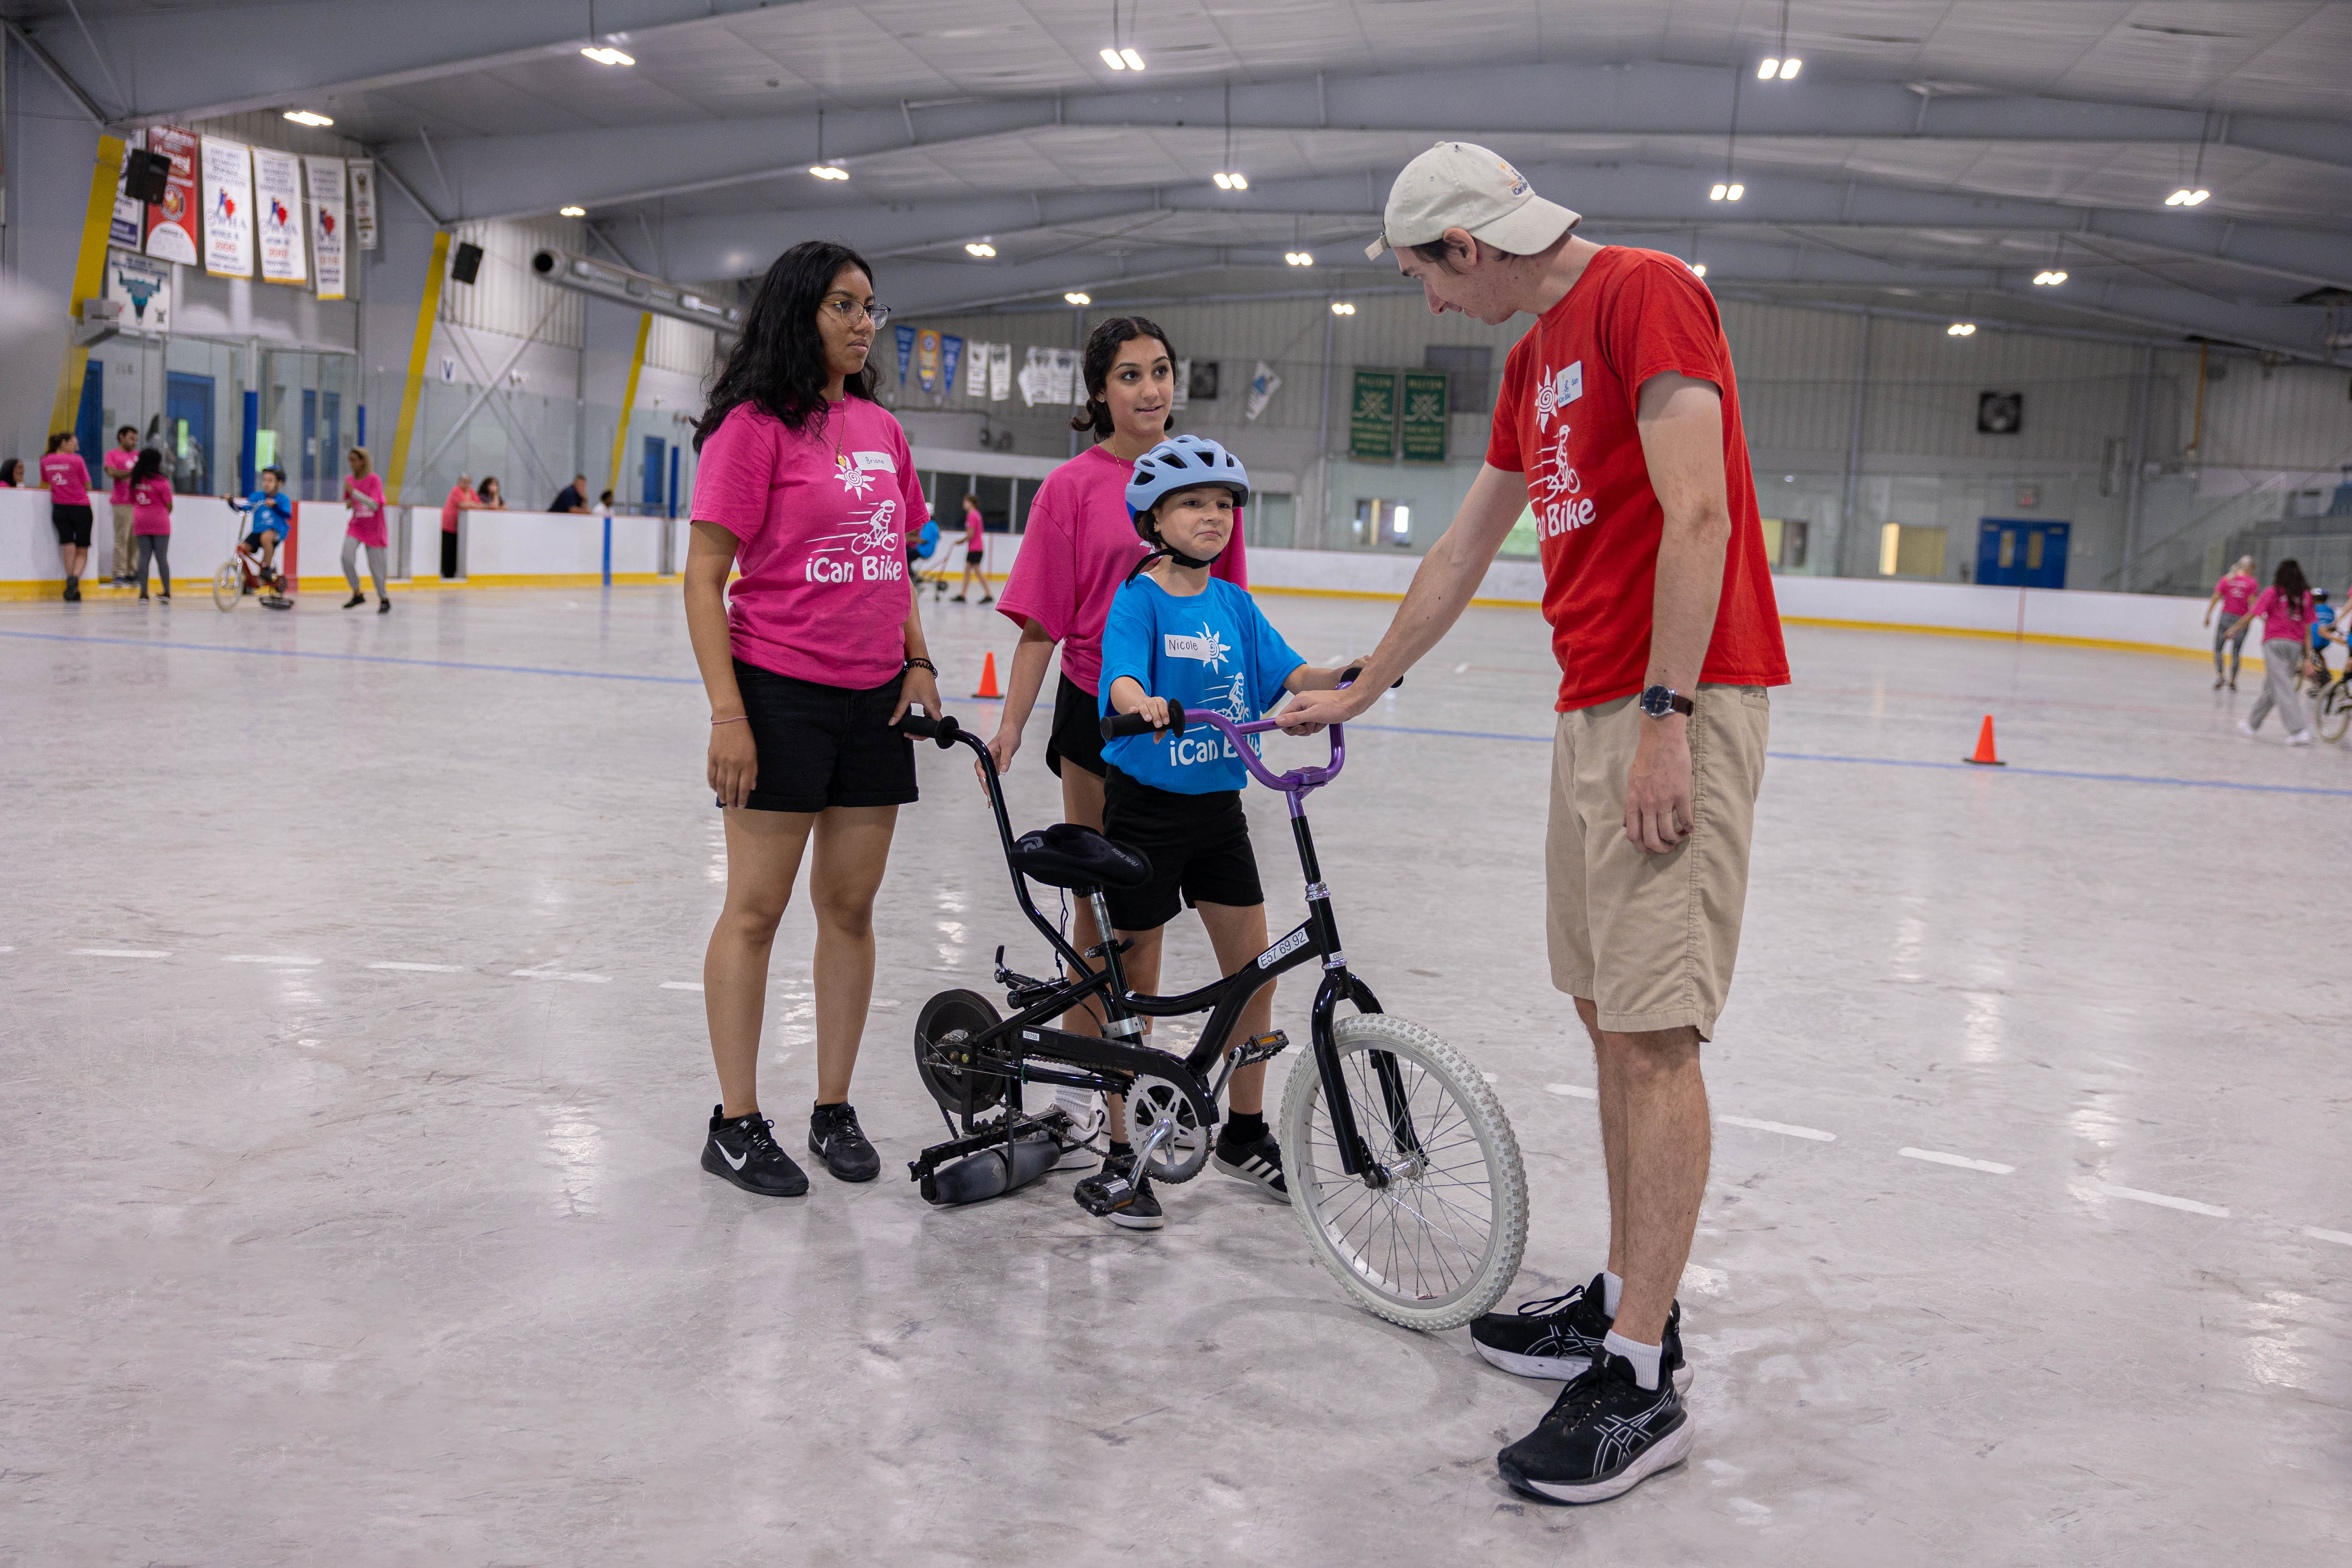 Young people helping children with disabilities to learn to ride a bike